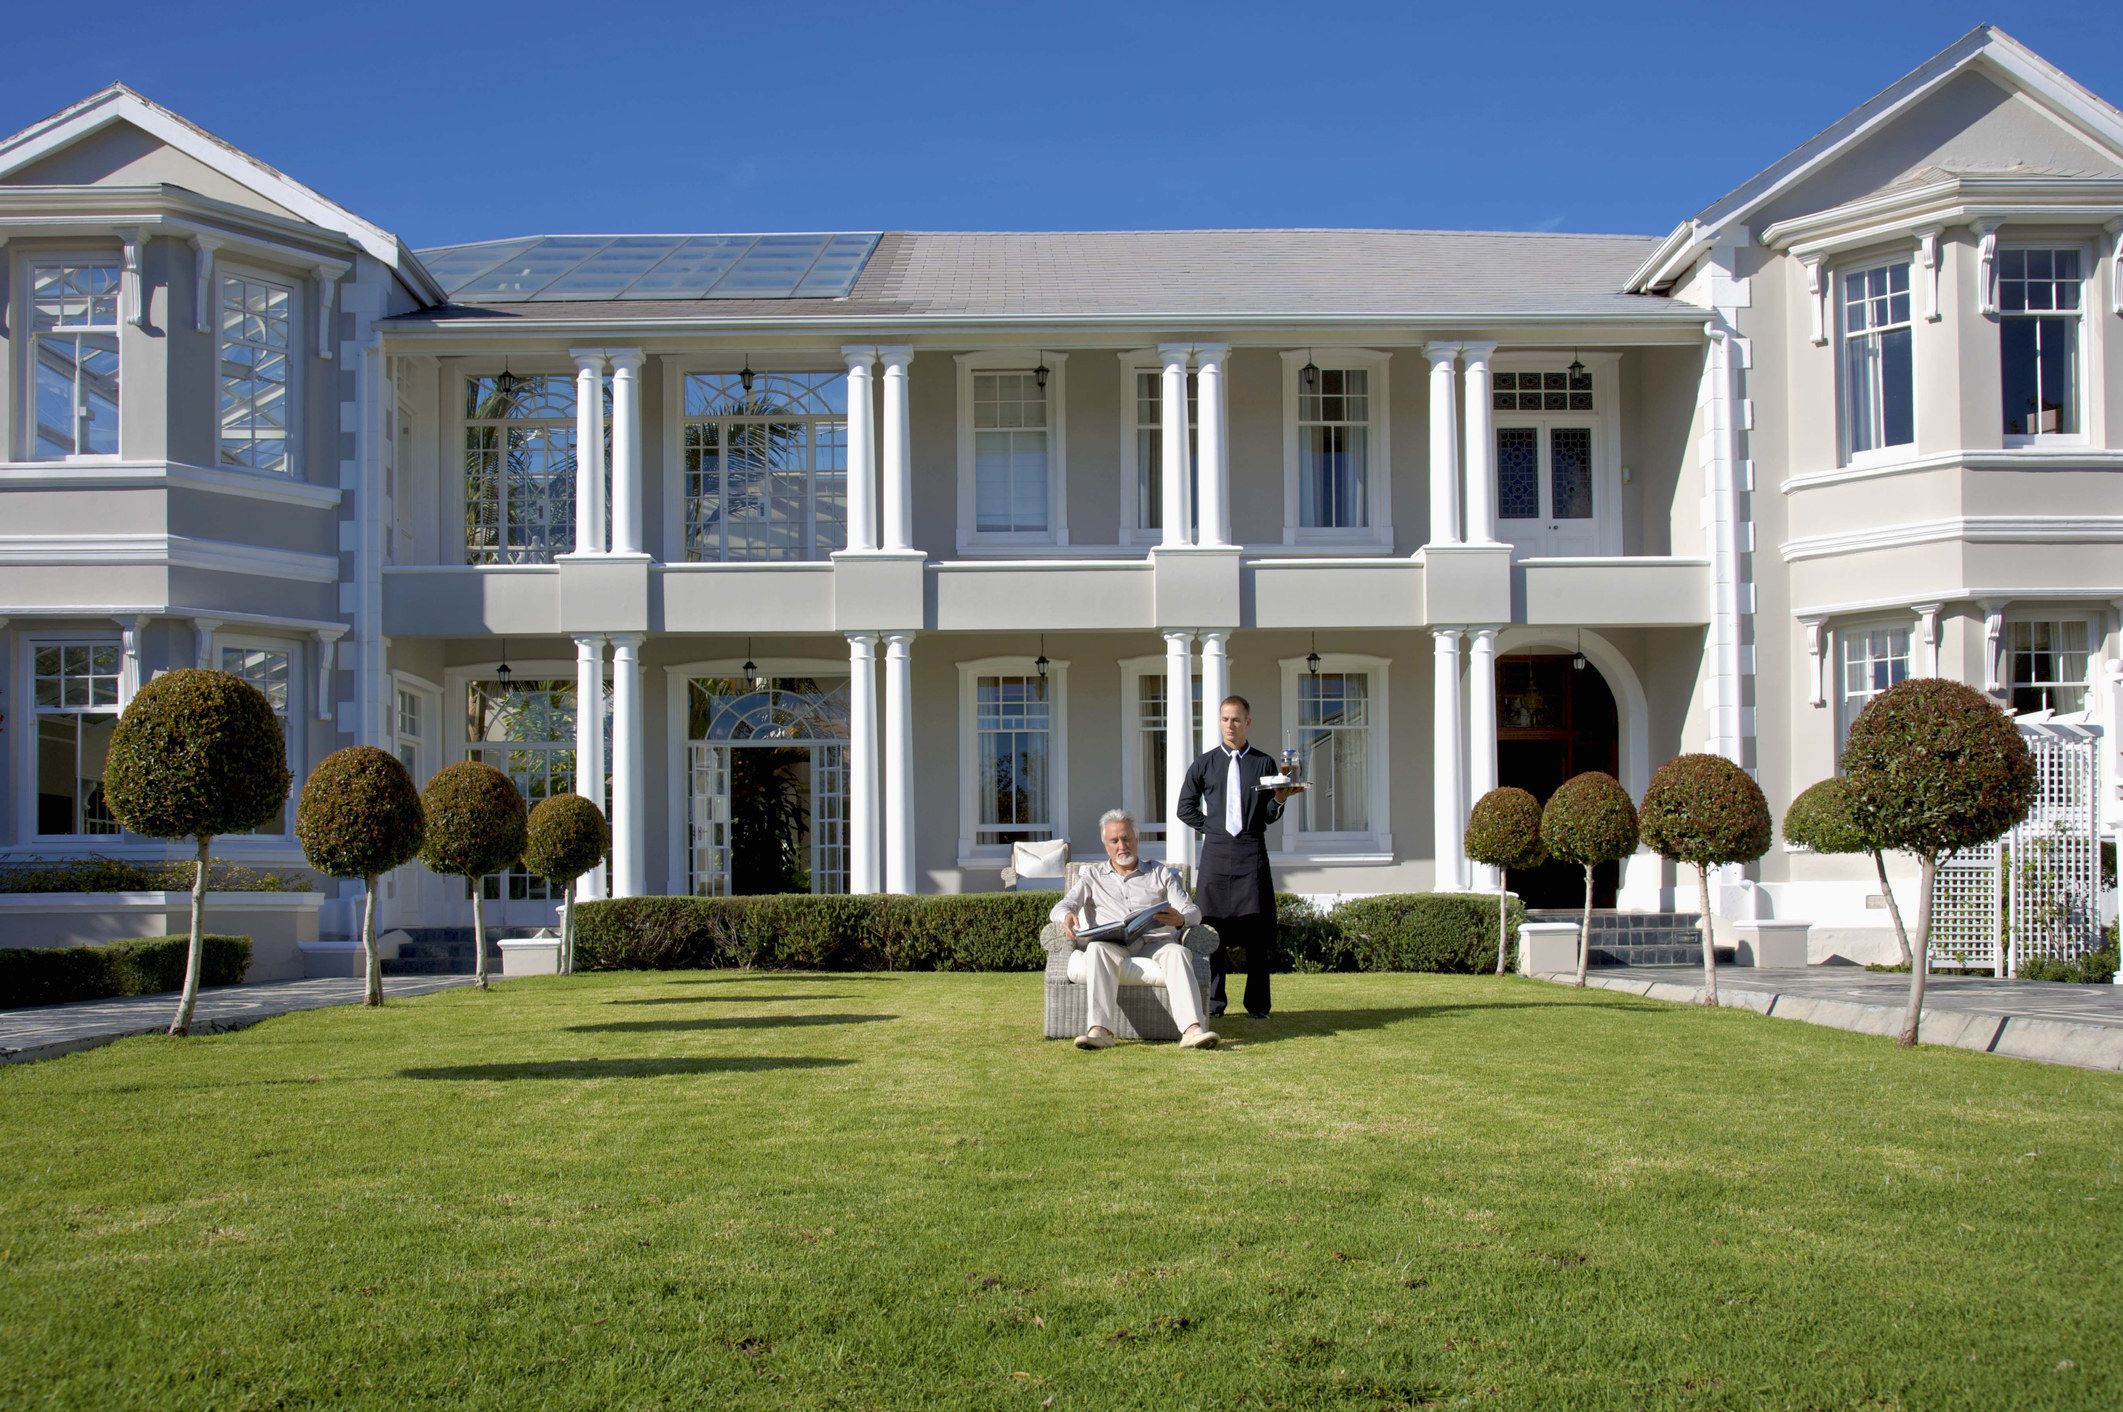 A butler bringing a tray to a man in his backyard outside of a large mansion